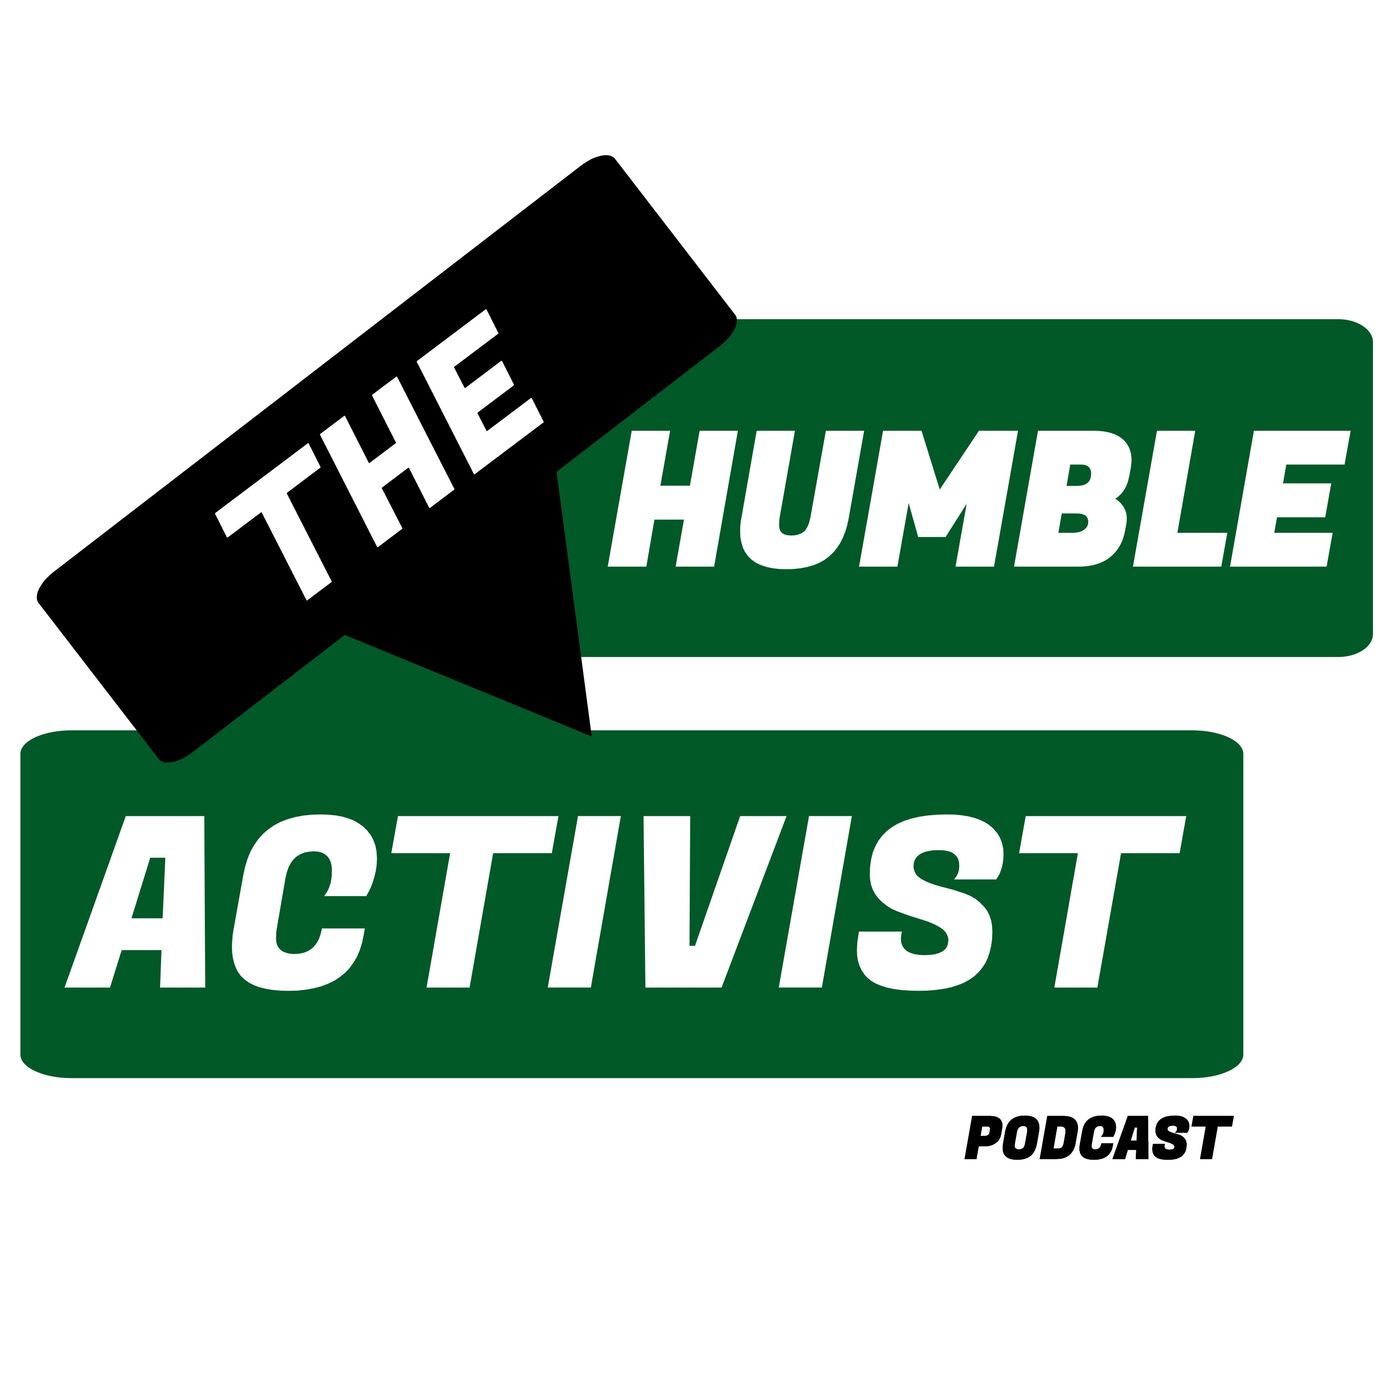 The Humble Activist Podcast